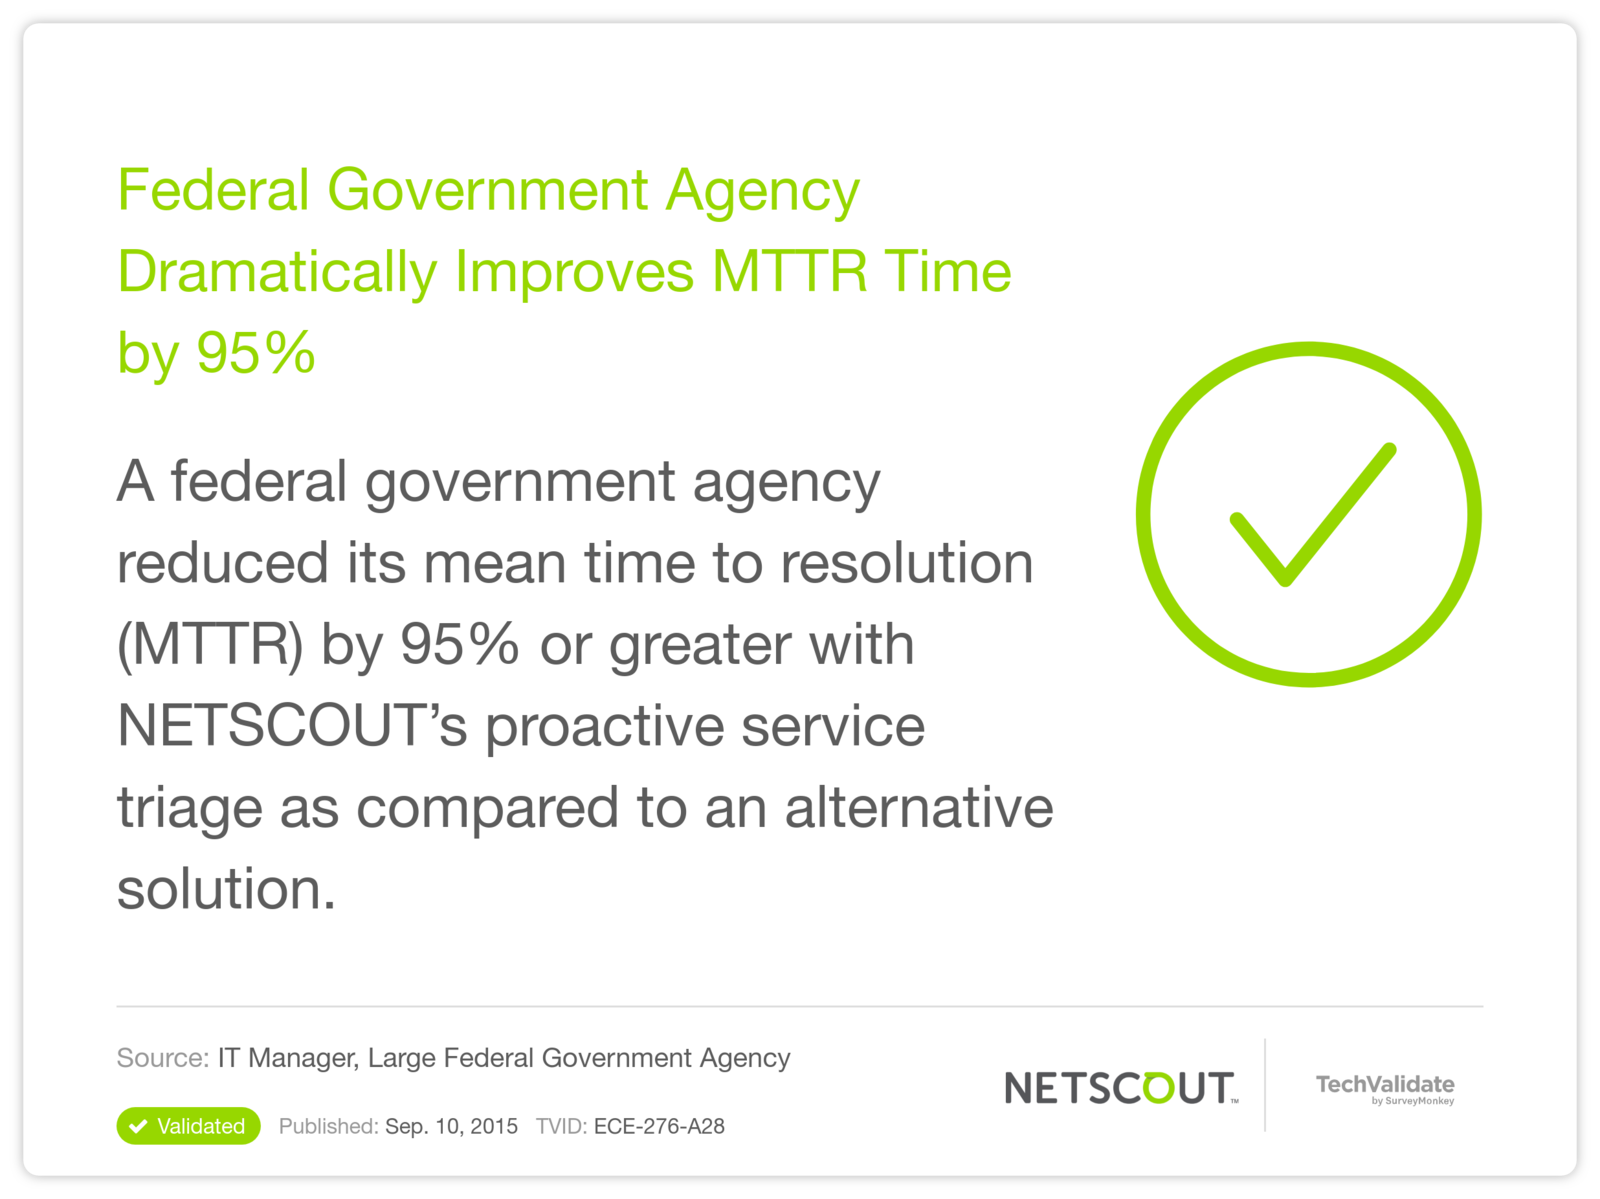 Federal Government Agency Dramatically Improves MTTR Time by 95%